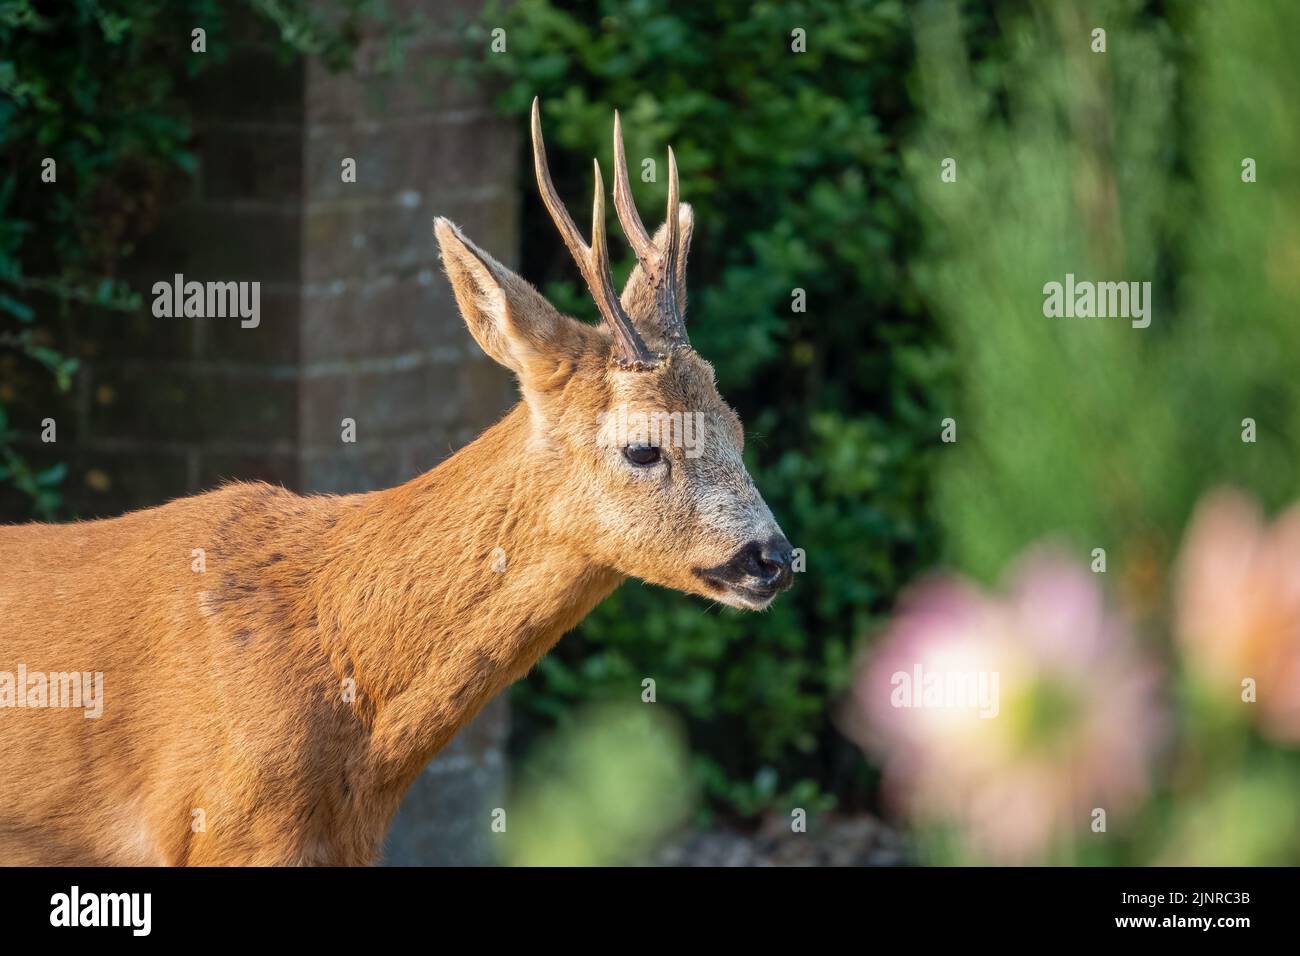 detailed close-up of a wild roe deer buck (Capreolus capreolus) in a domestic garden Stock Photo